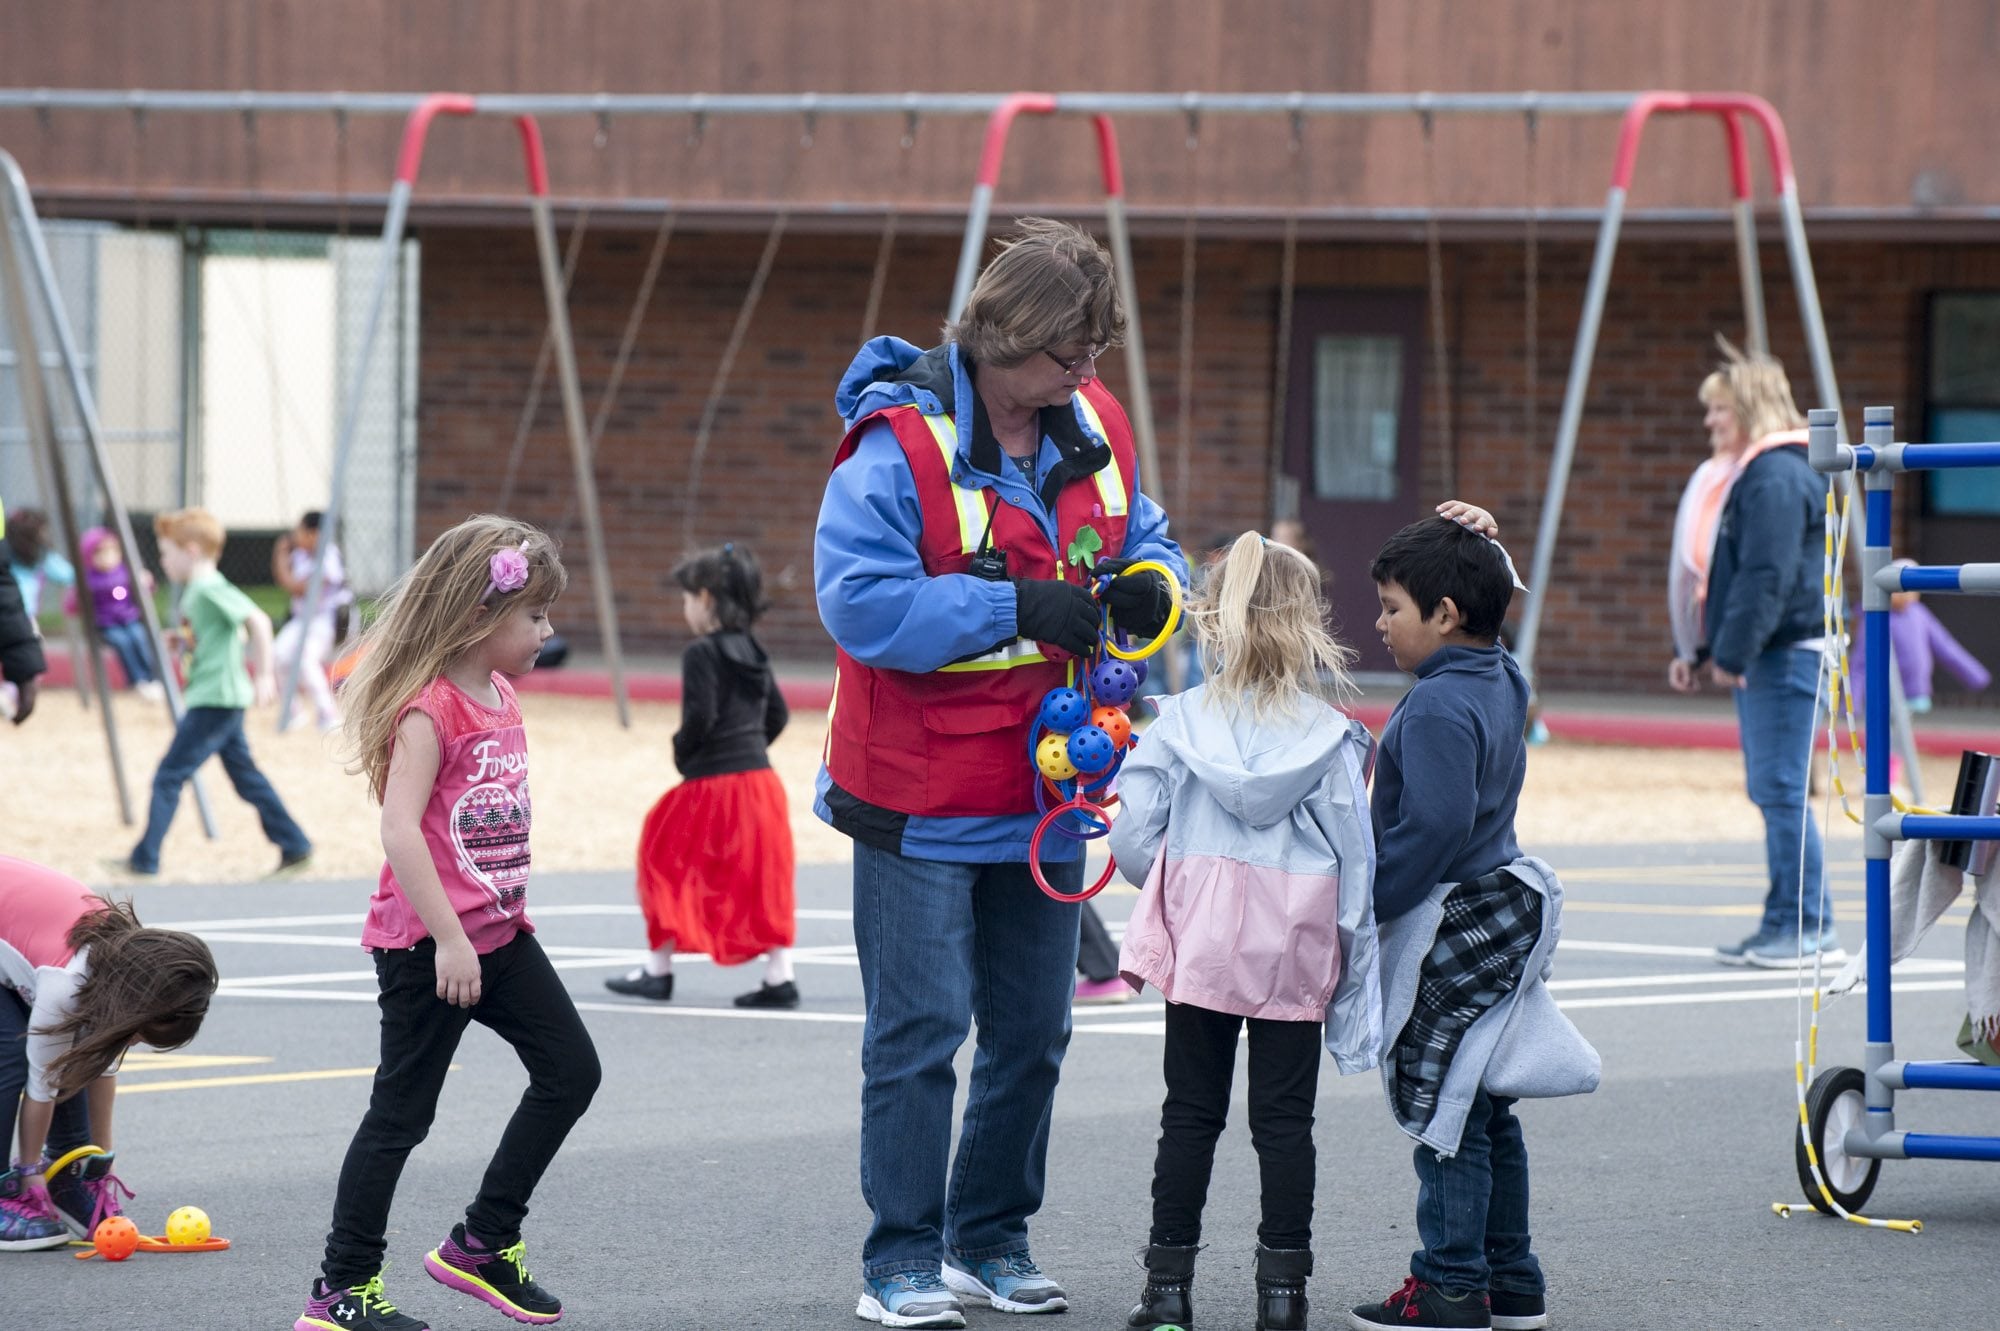 Marilyn Paul, an instructional assistant at Woodland Primary School, has seen more kids playing games at recess in recent weeks since the school started Playworks, which aims to make recess more structured to teach students to be more inclusive and how to resolve conflict.